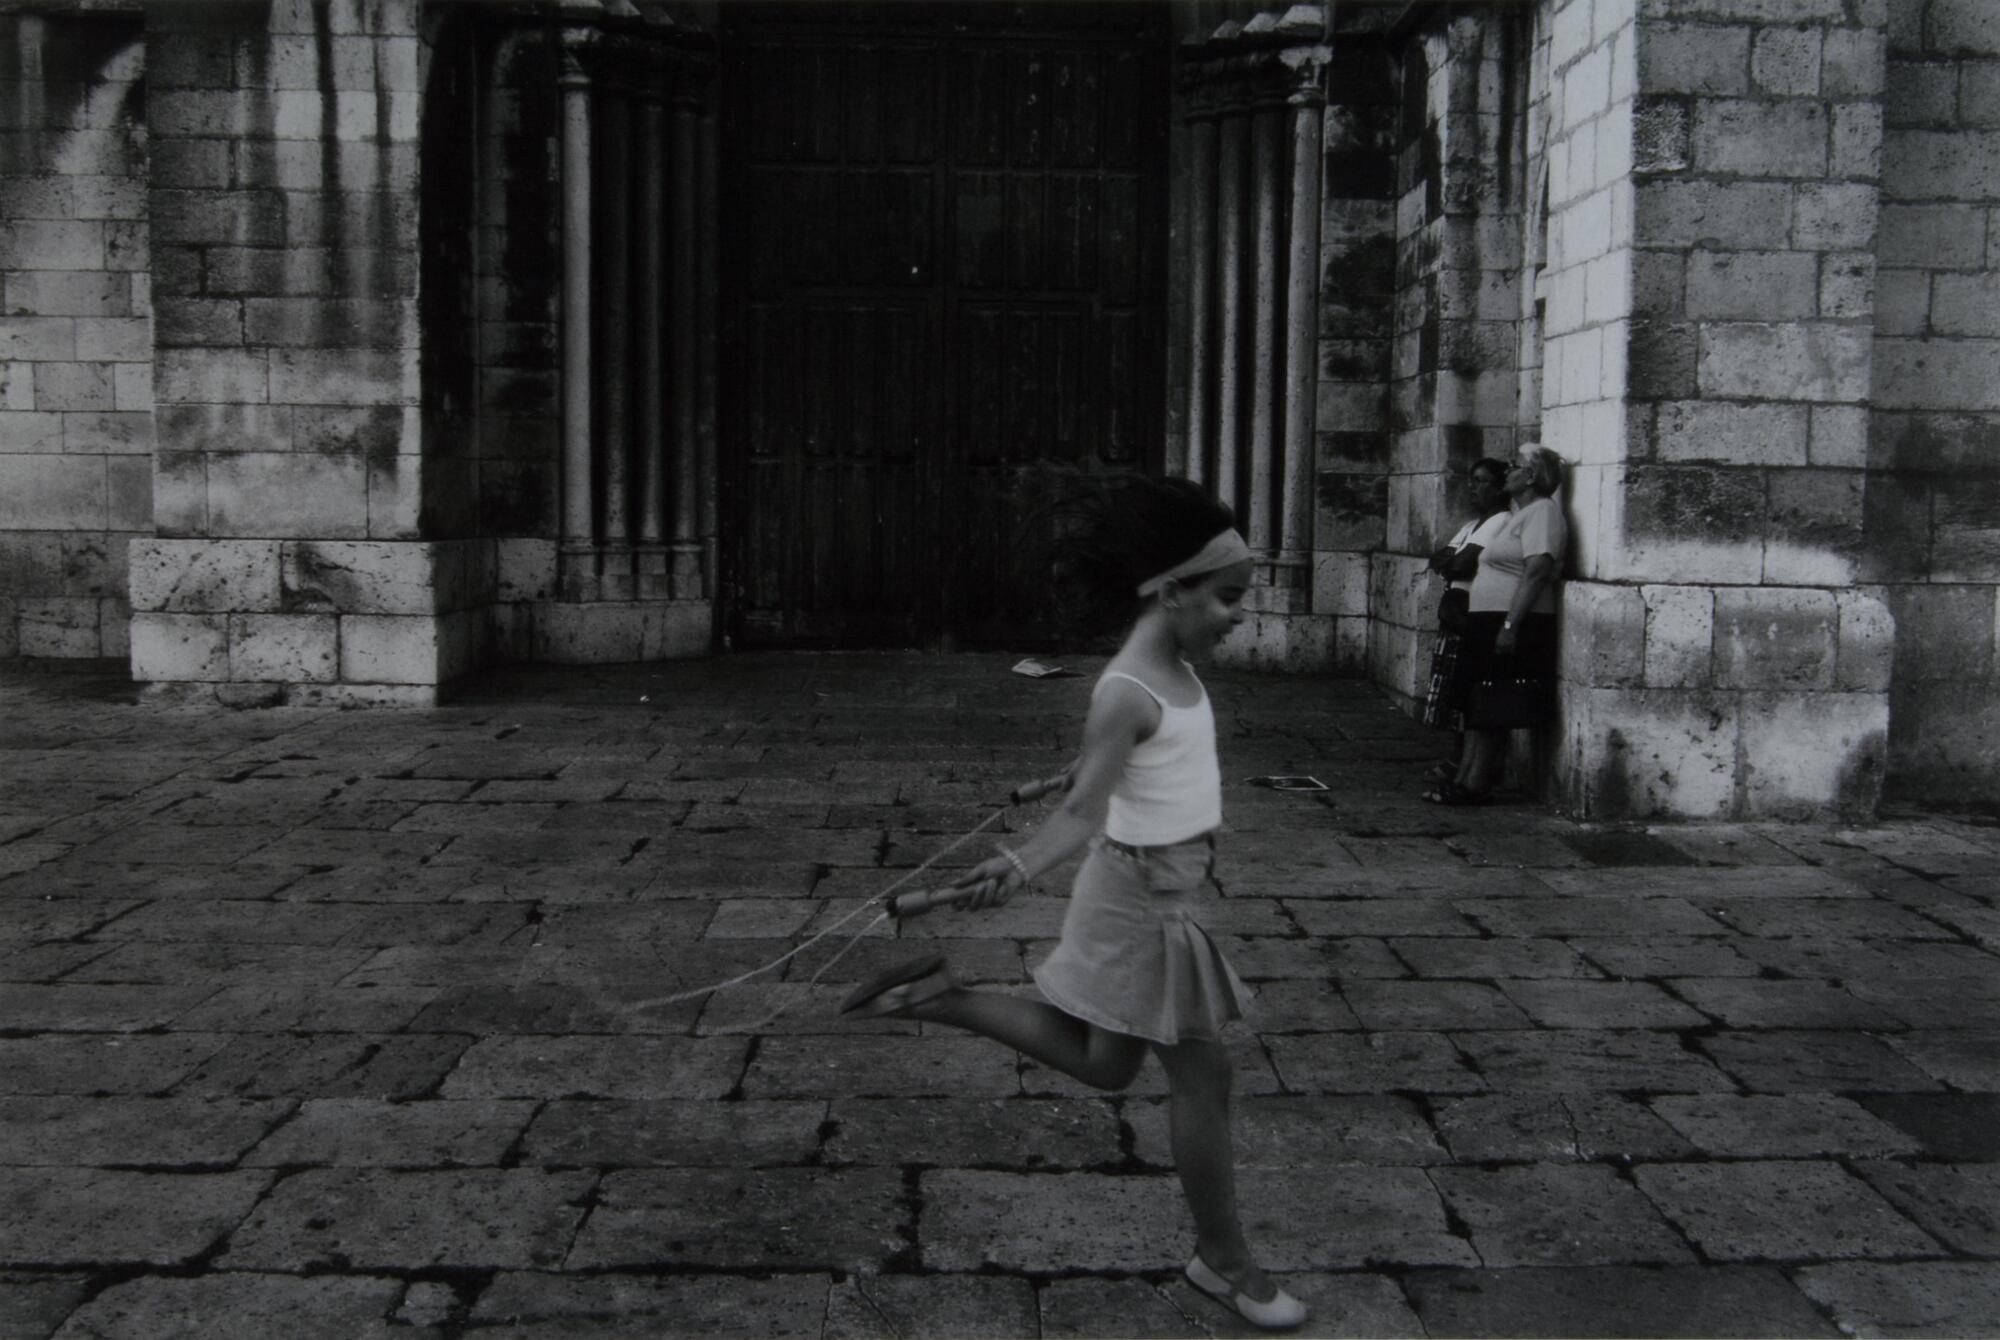 A little girl jumping rope. Two women in the background are leaning up against a building.